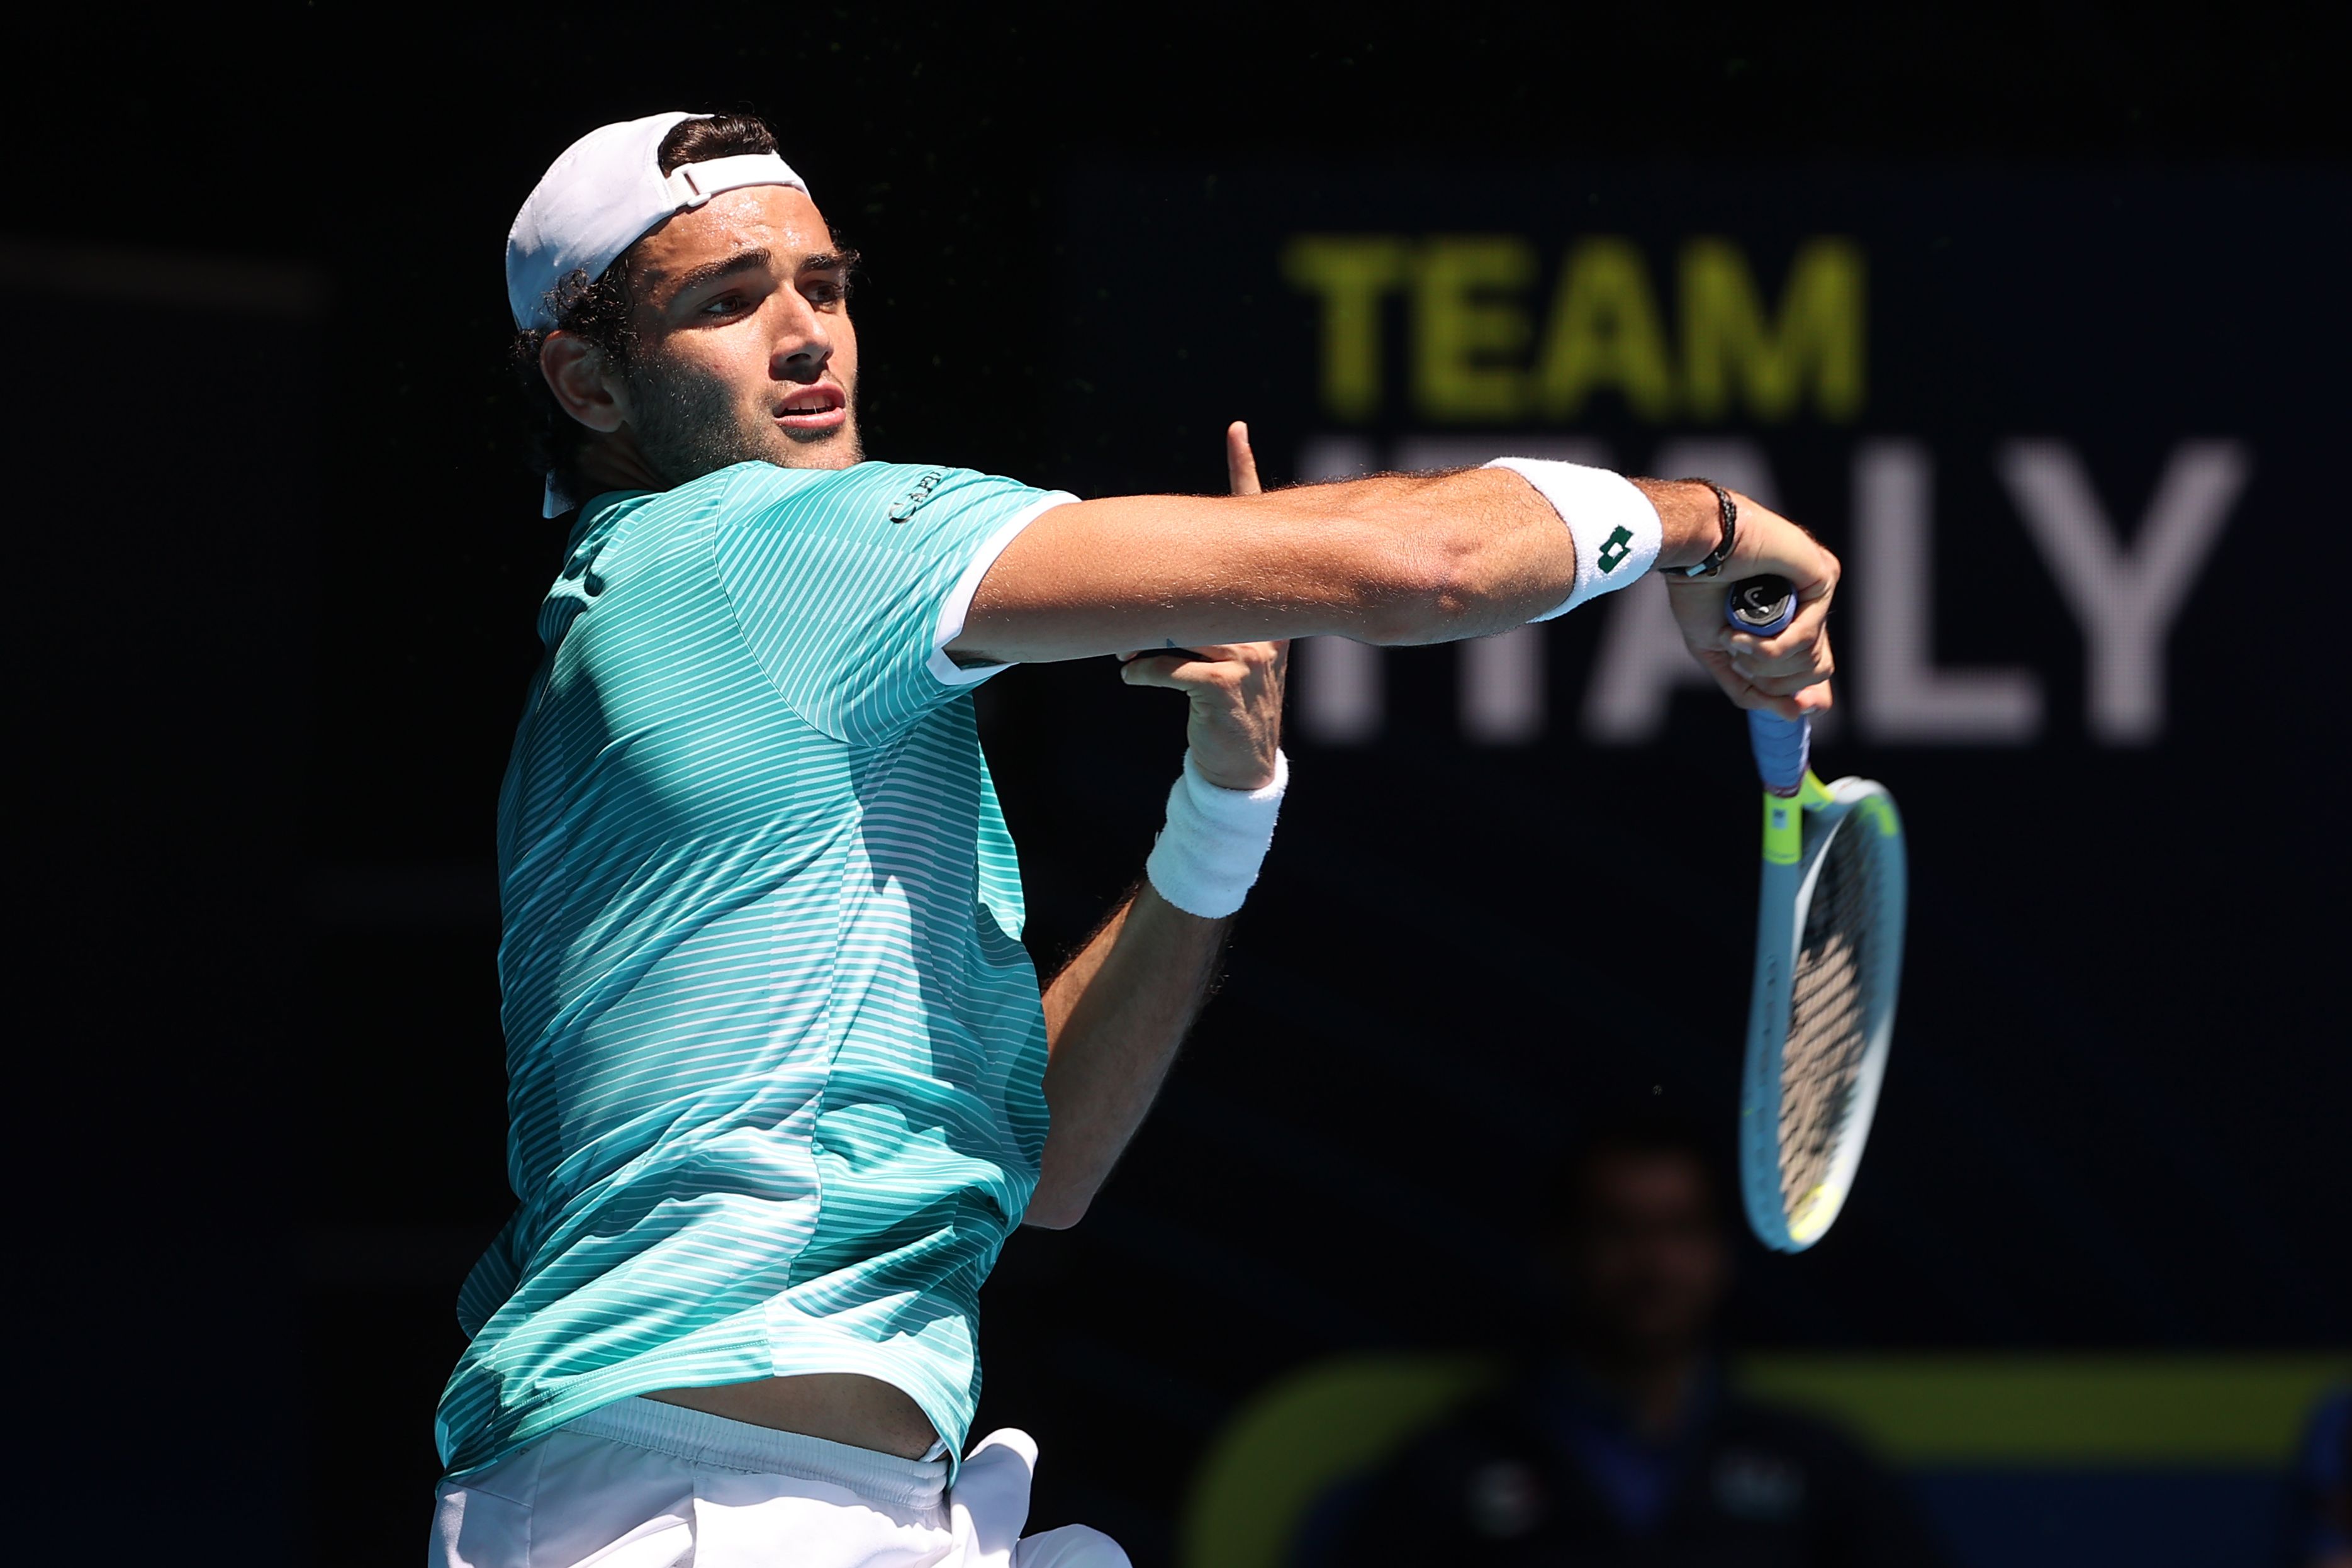 Berrettini upends Monfils to send Italy through to ATP Cup semifinals